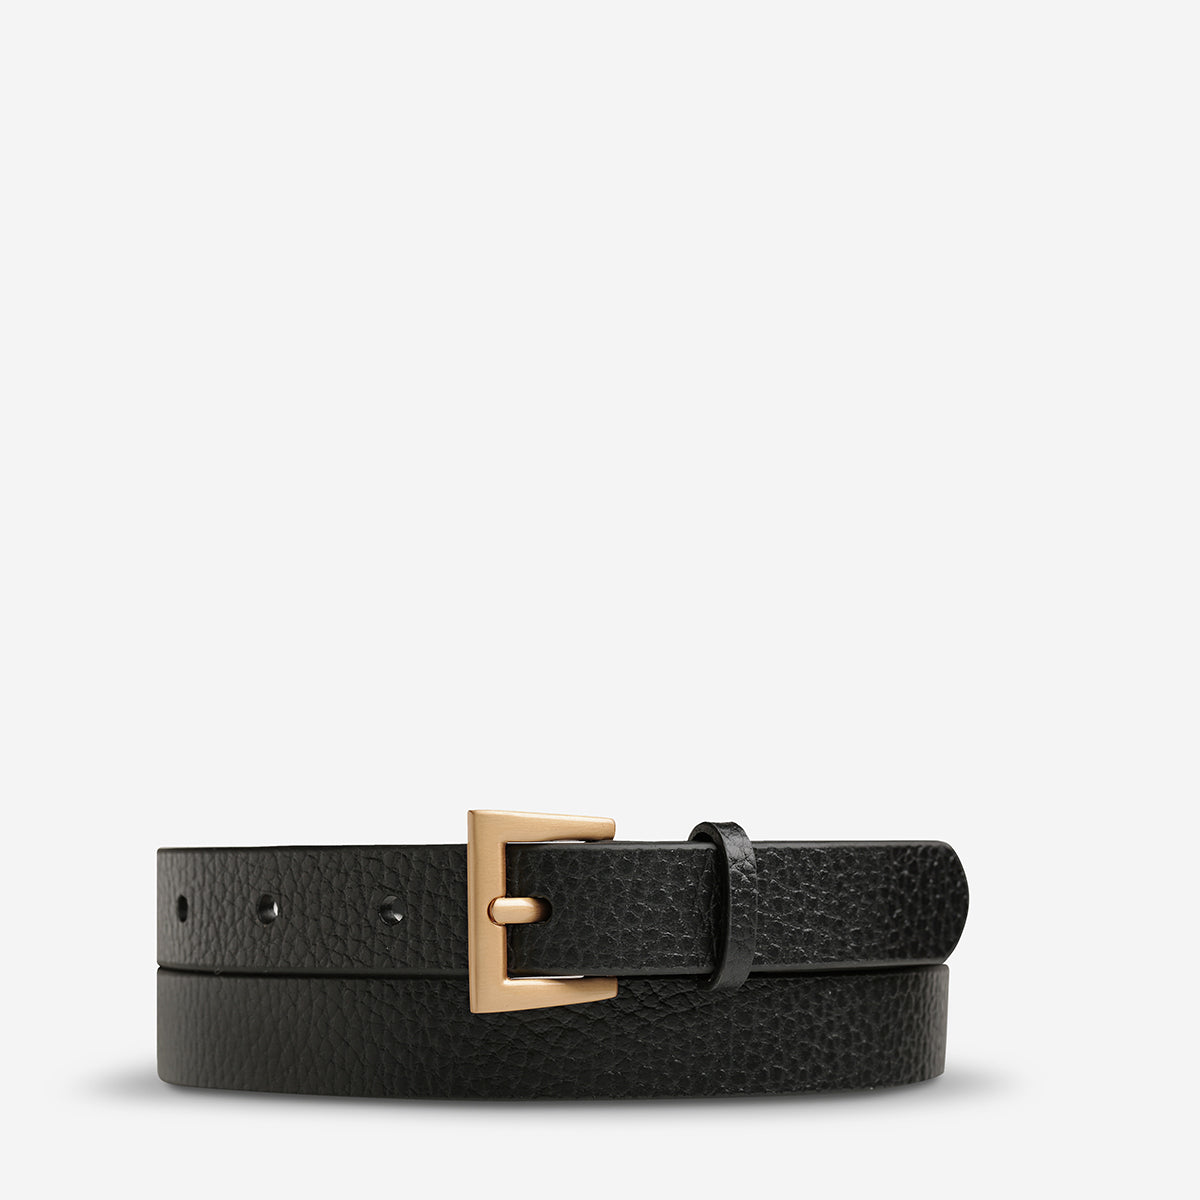 Status Anxiety ‘Part of Me’ Women's Leather Belt Black / Gold